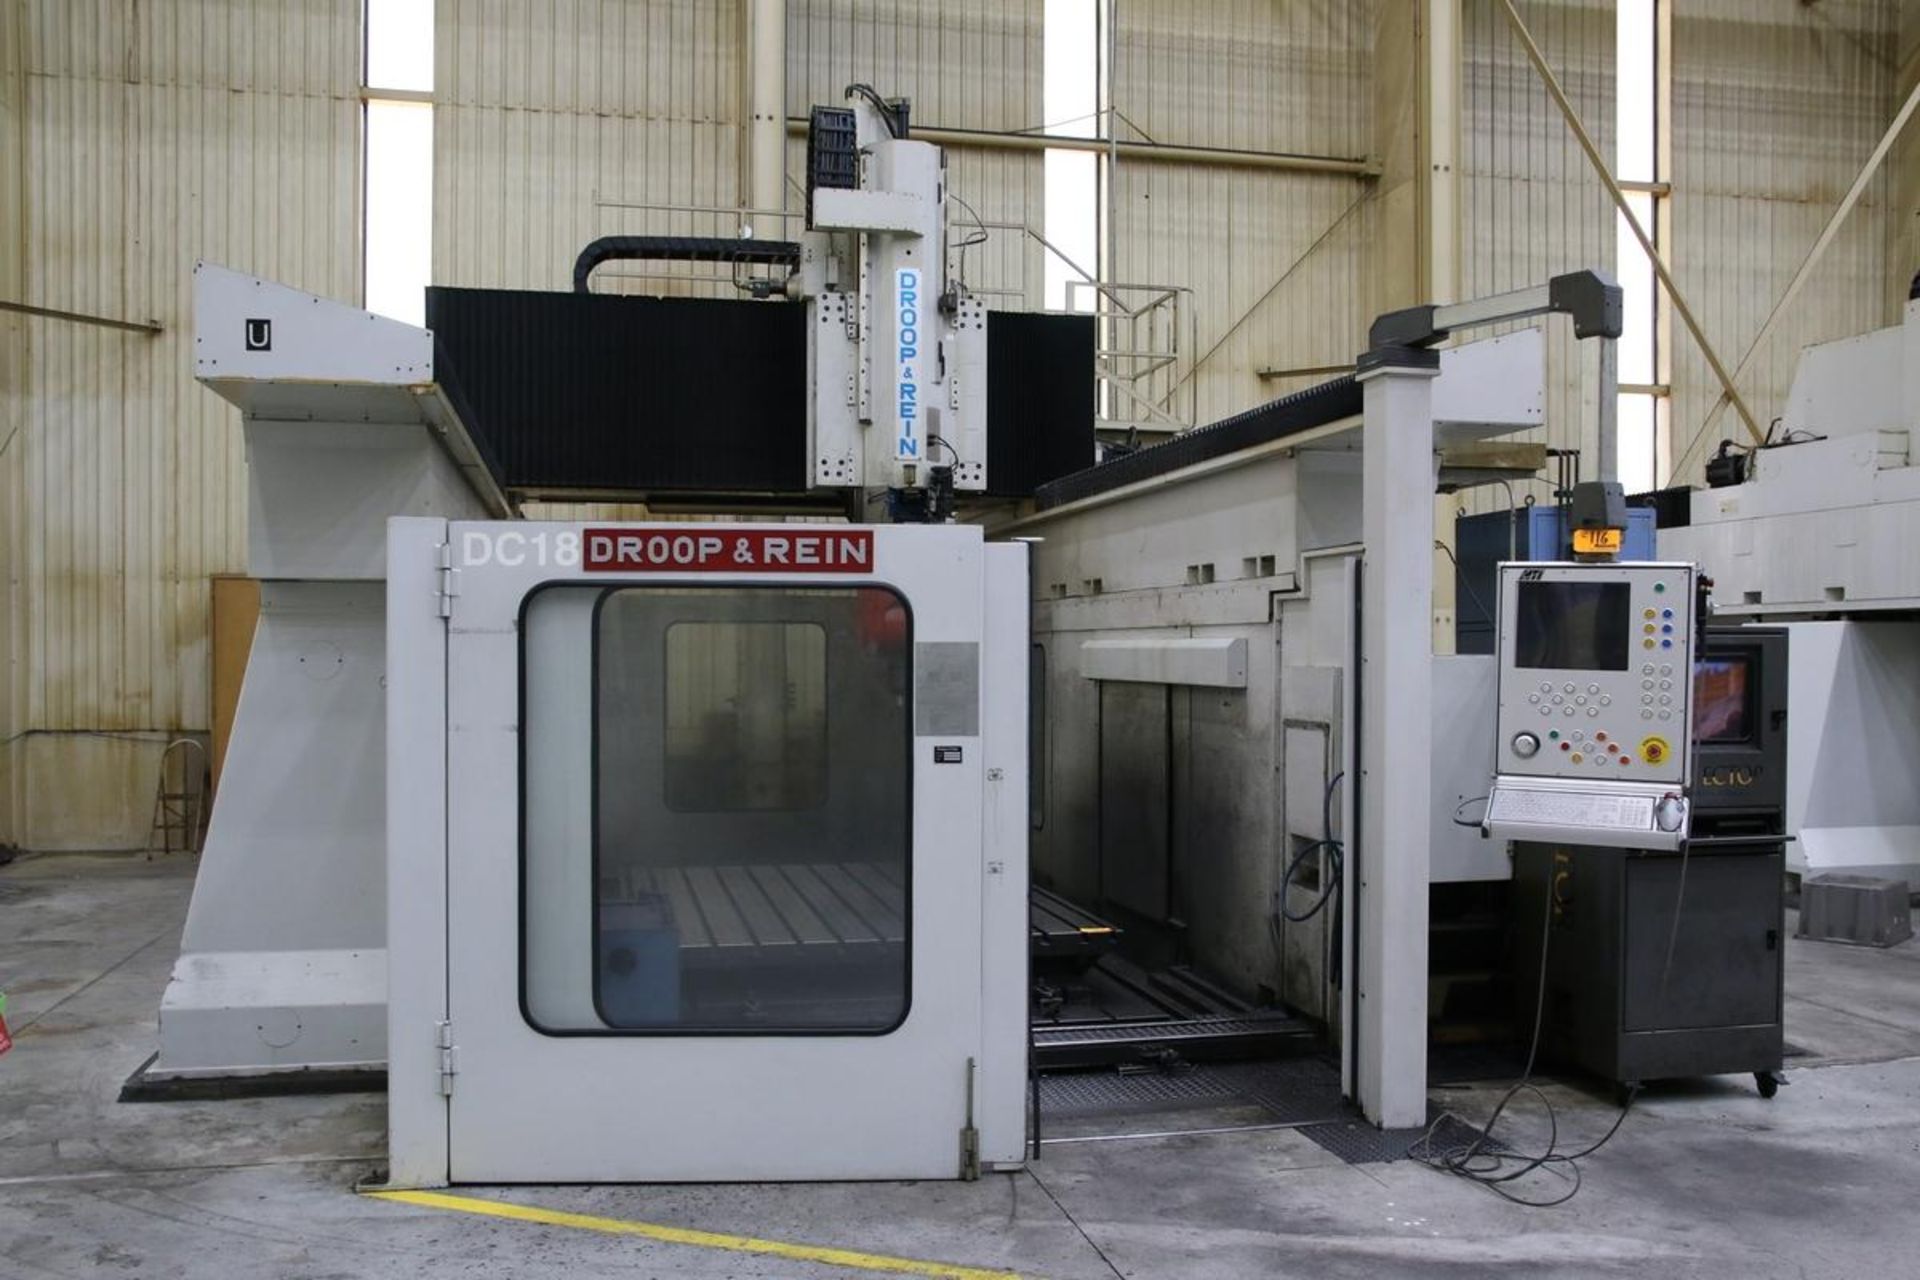 1995 Droop & Rein FOG 2500 HS11/13NW 5-Axis CNC High Speed Gantry Mill